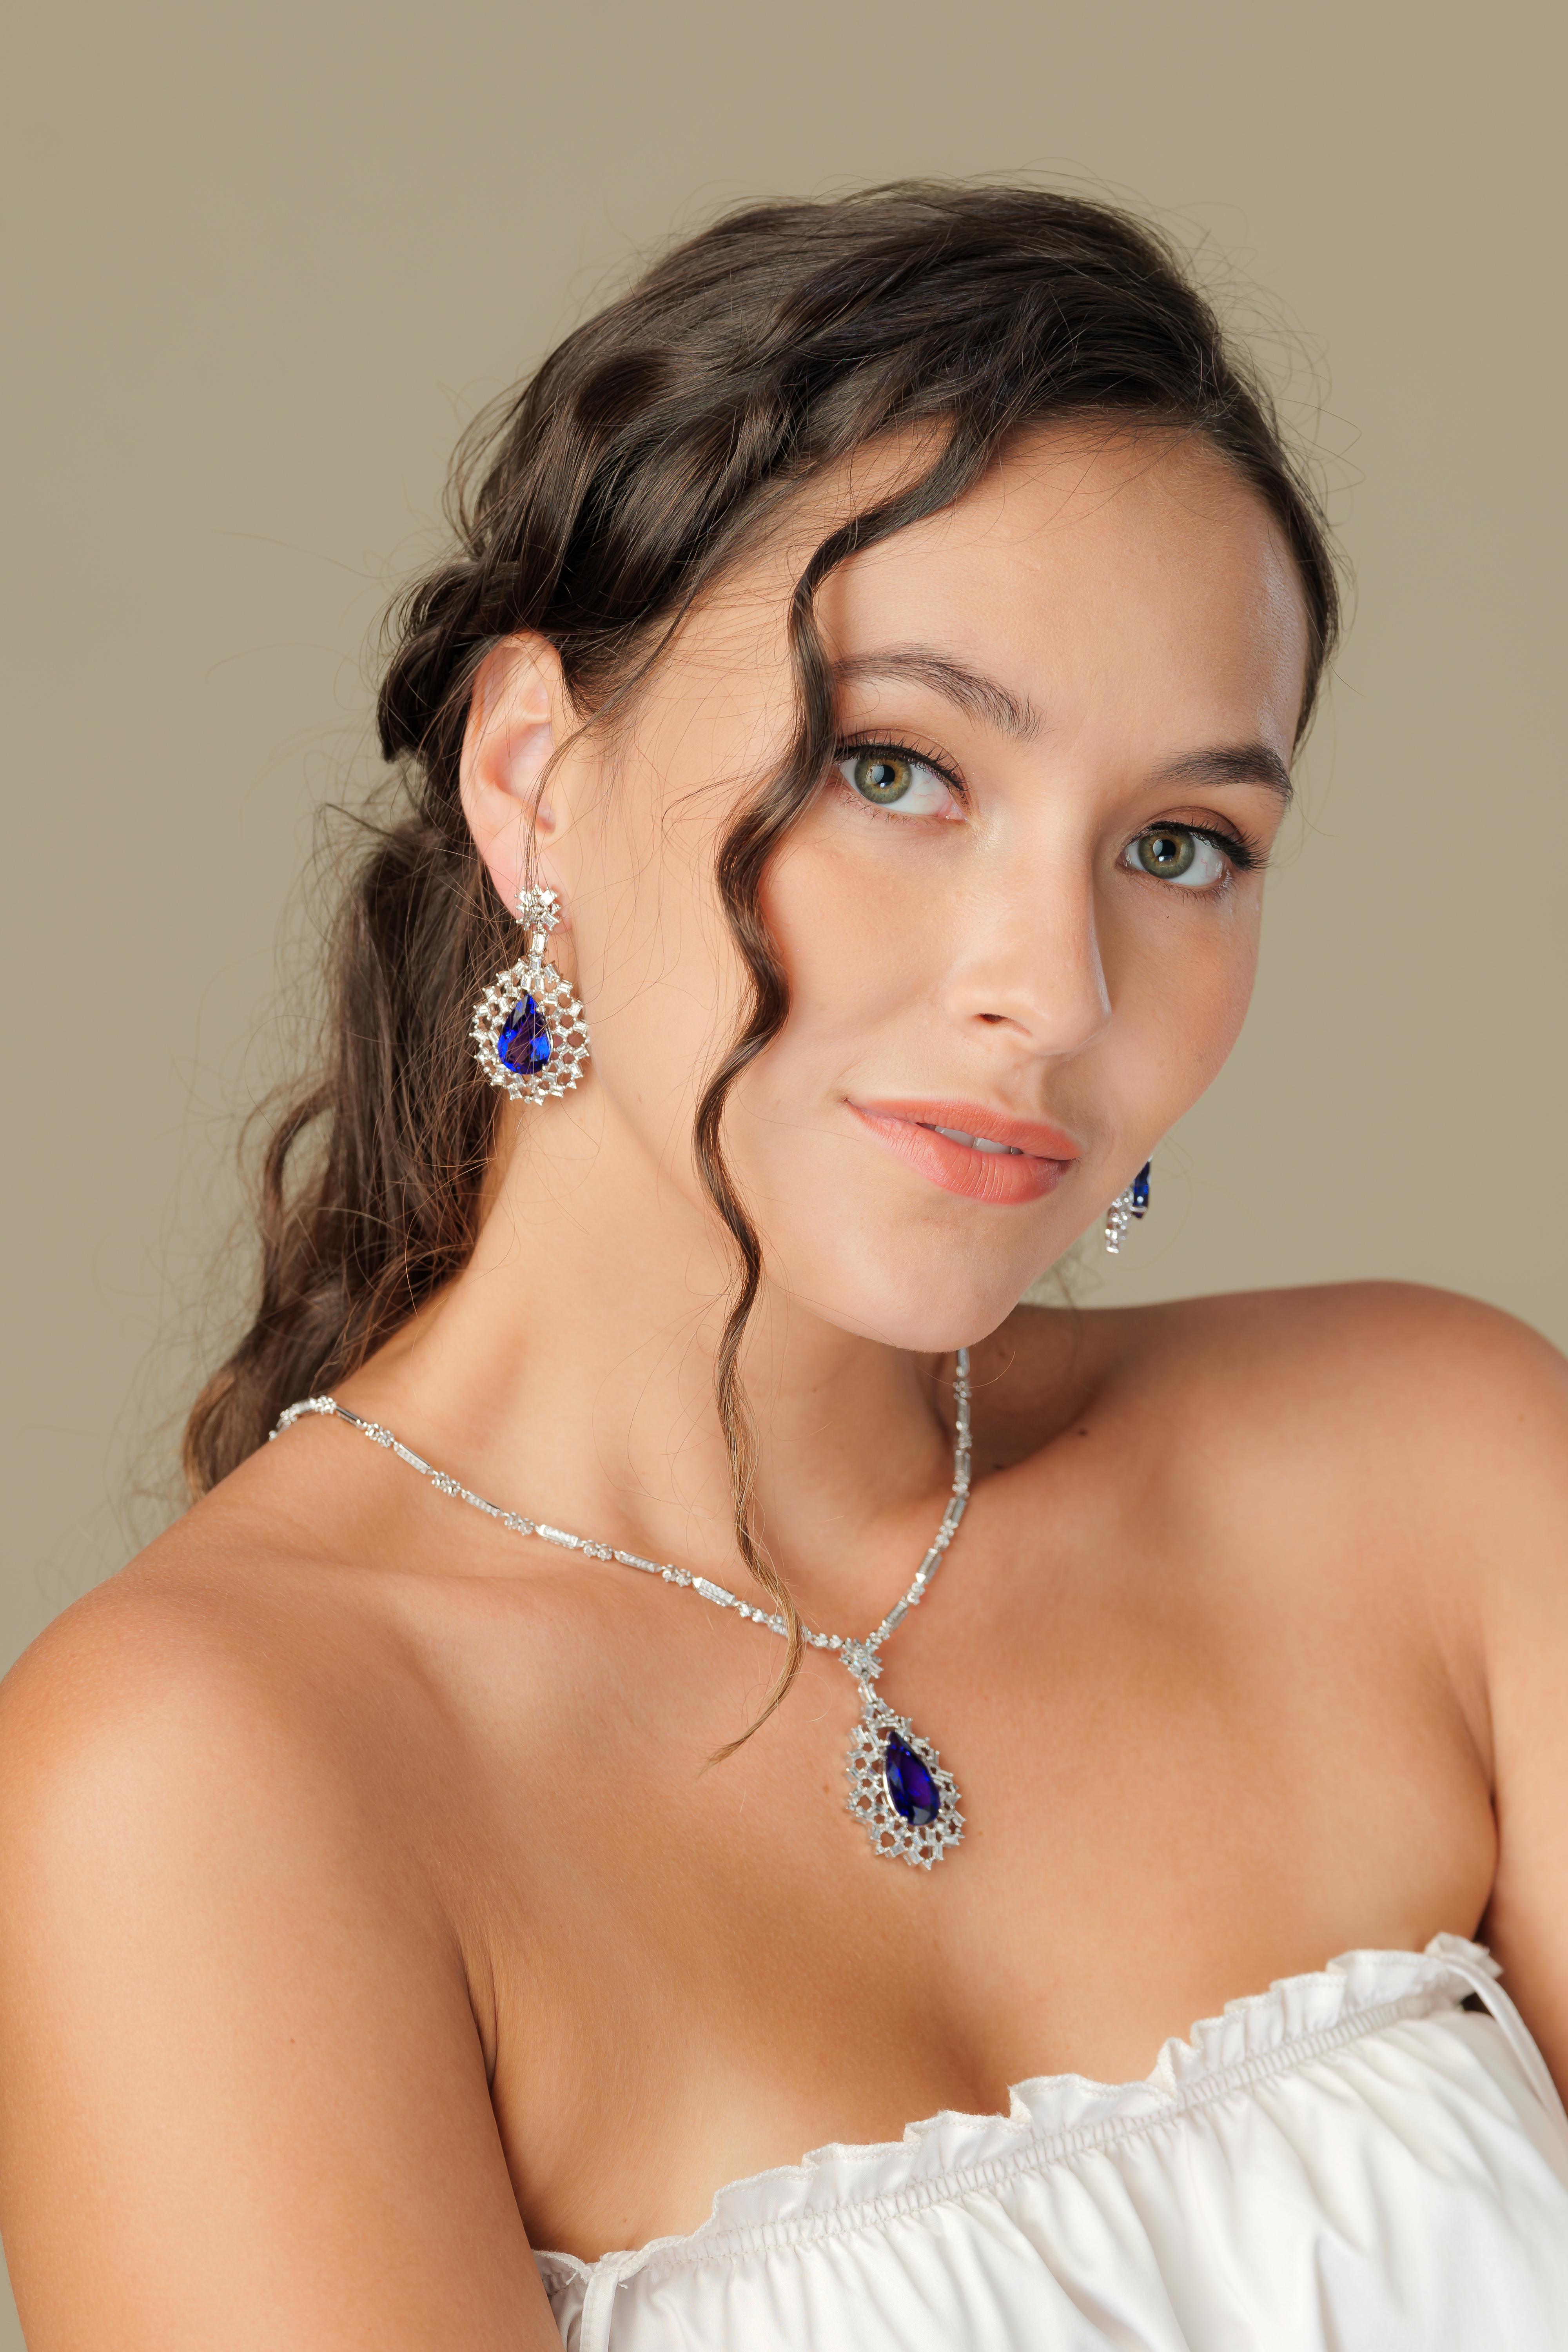 Snowflake Tanzanites! This collection features elegant pear shaped Taznzanites that are encompassed by a cage of baguette cut icy white diamonds set in white gold.

Snowflake tanzanite and diamond earrings in 18K white gold. 

Tanzanite: 18.85 carat